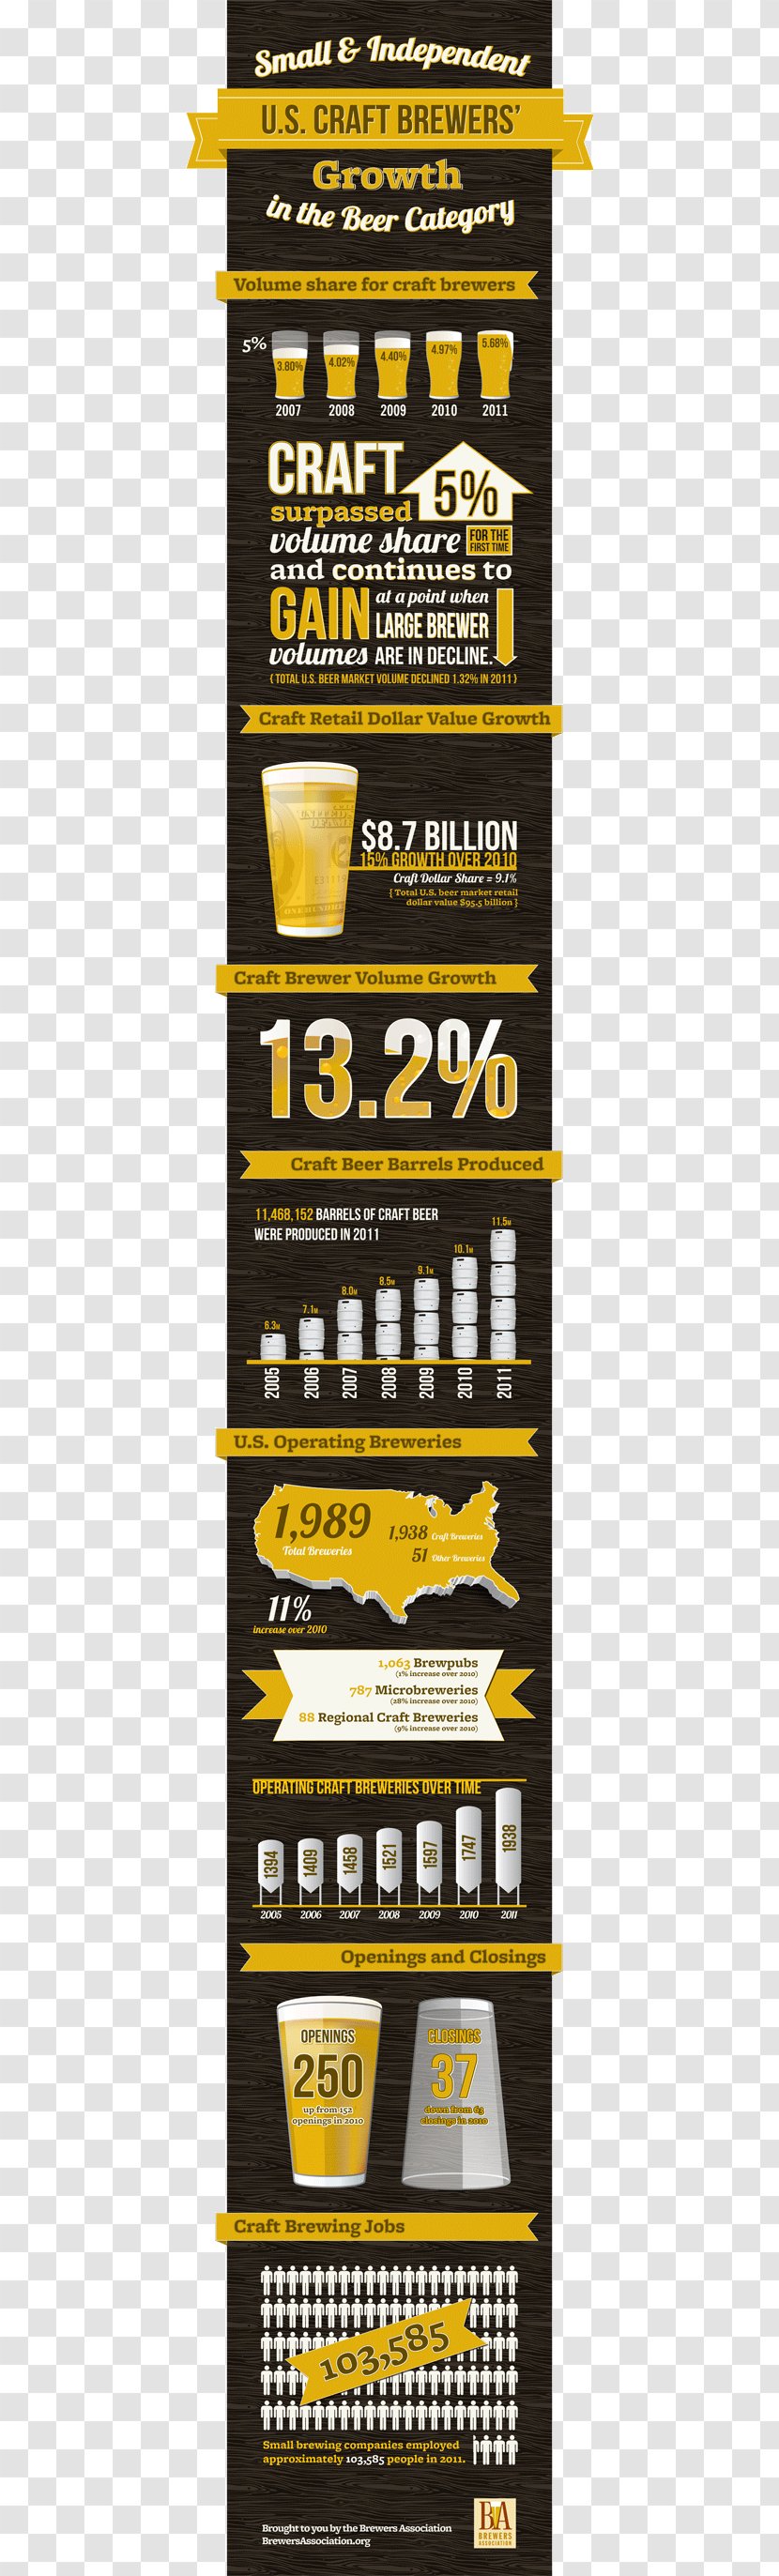 Craft Beer Brewers Association Brewing Grains & Malts Brewery - Growth Infographic Transparent PNG